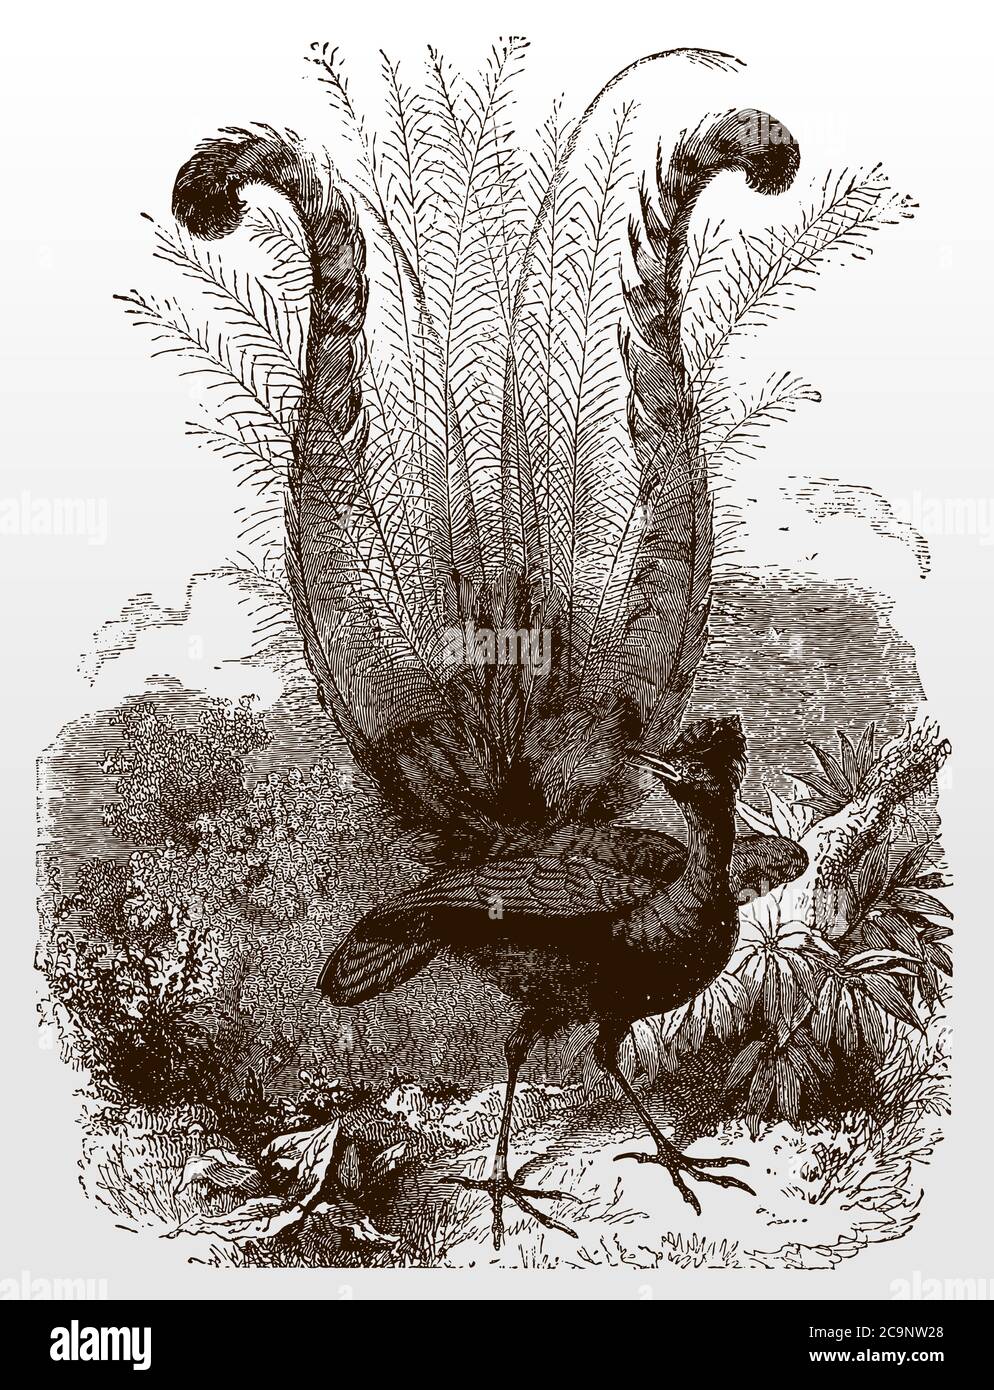 Superb lyrebird, menura novaehollandiae displaying its beautiful tail feathers, after an antique illustration from the 19th century Stock Vector